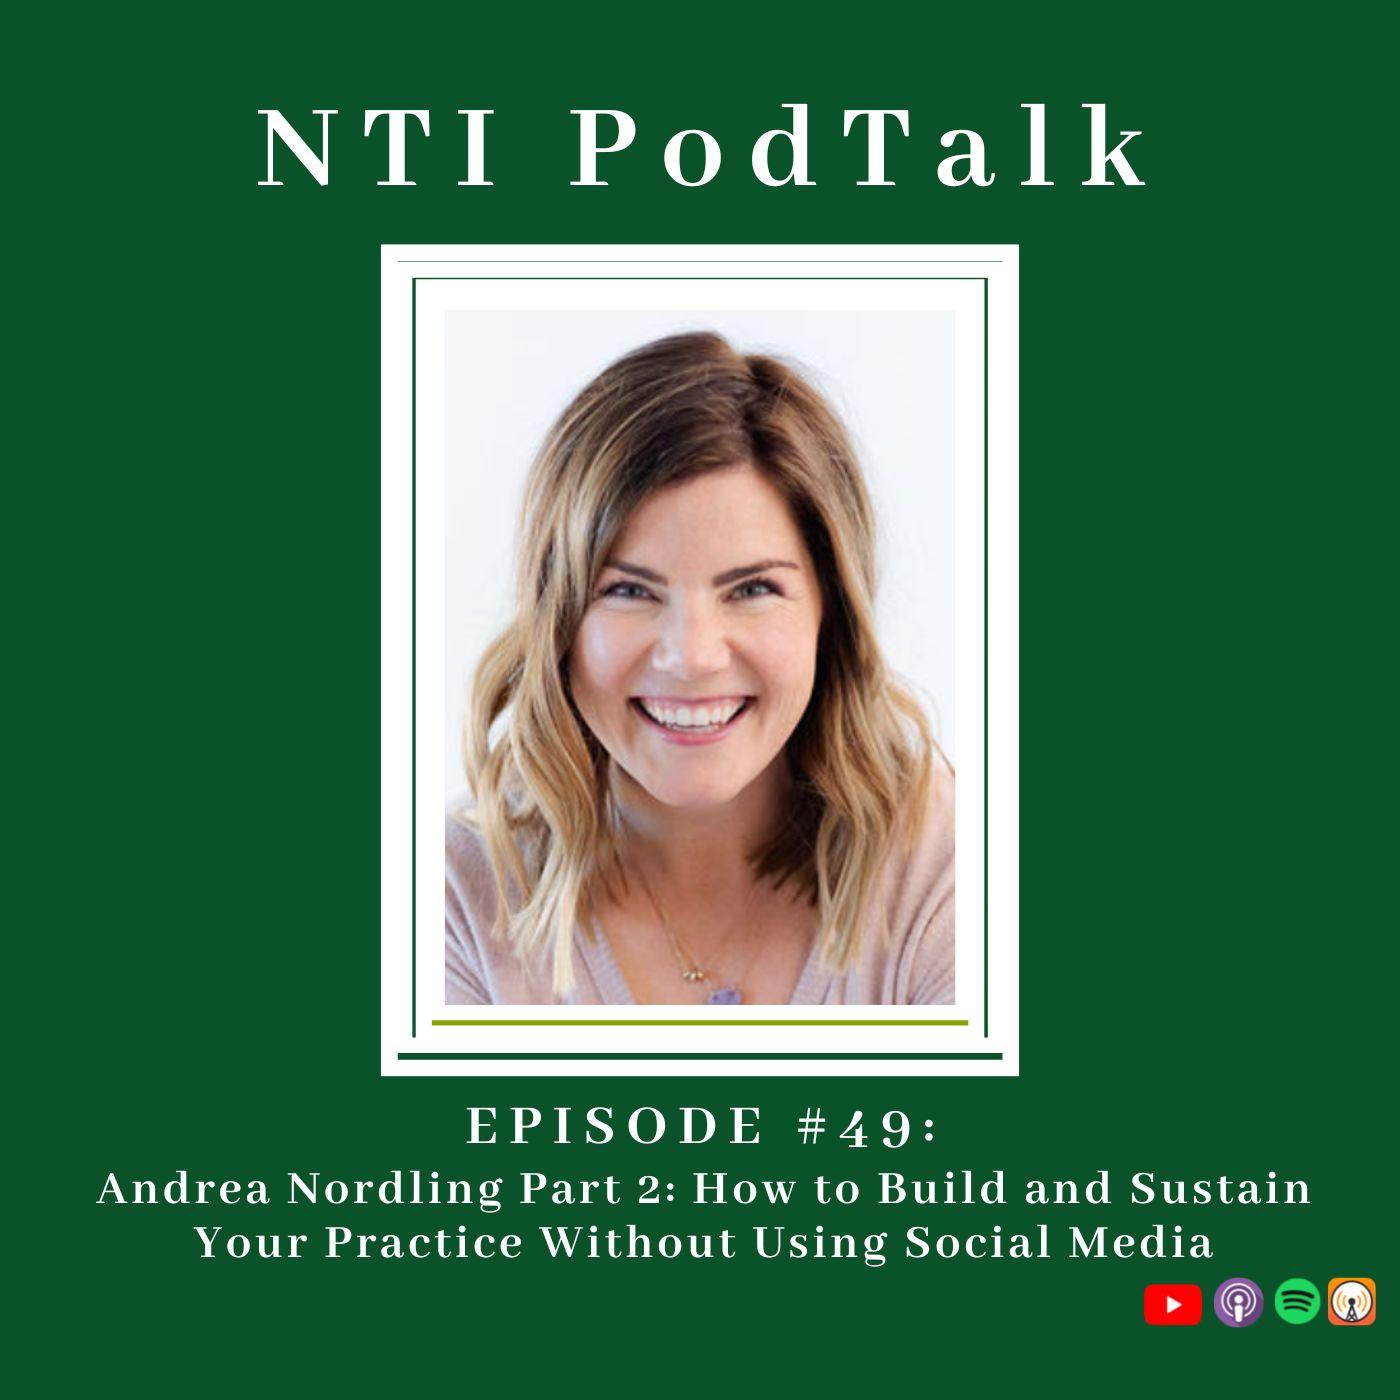 Featured image for “NTI PodTalk with Andrea Nordling”